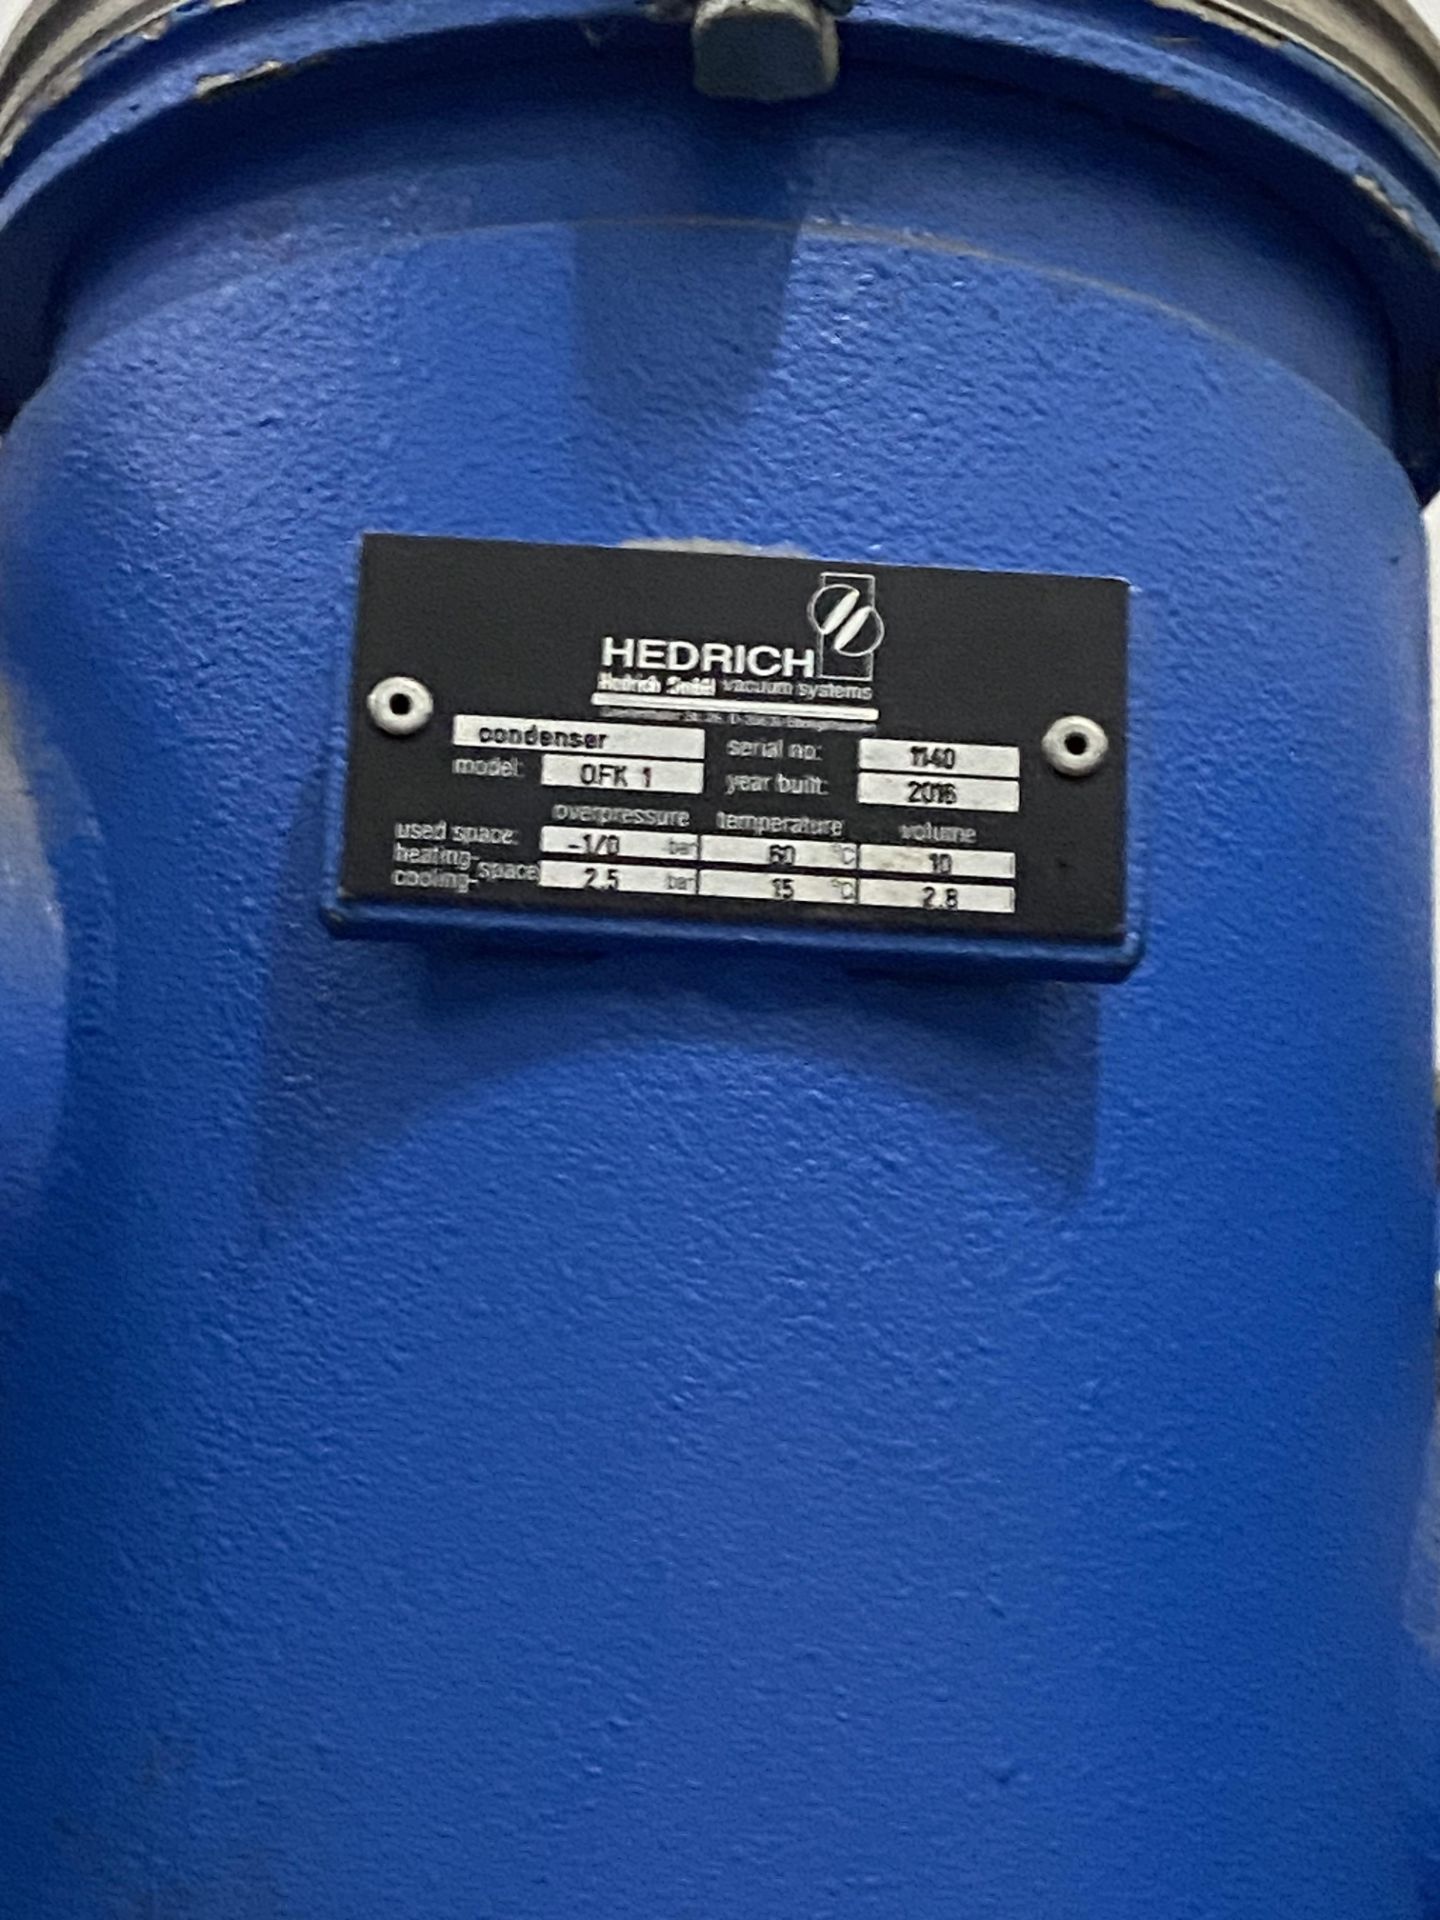 ETECHEID Chiller System (2016) - Image 15 of 19